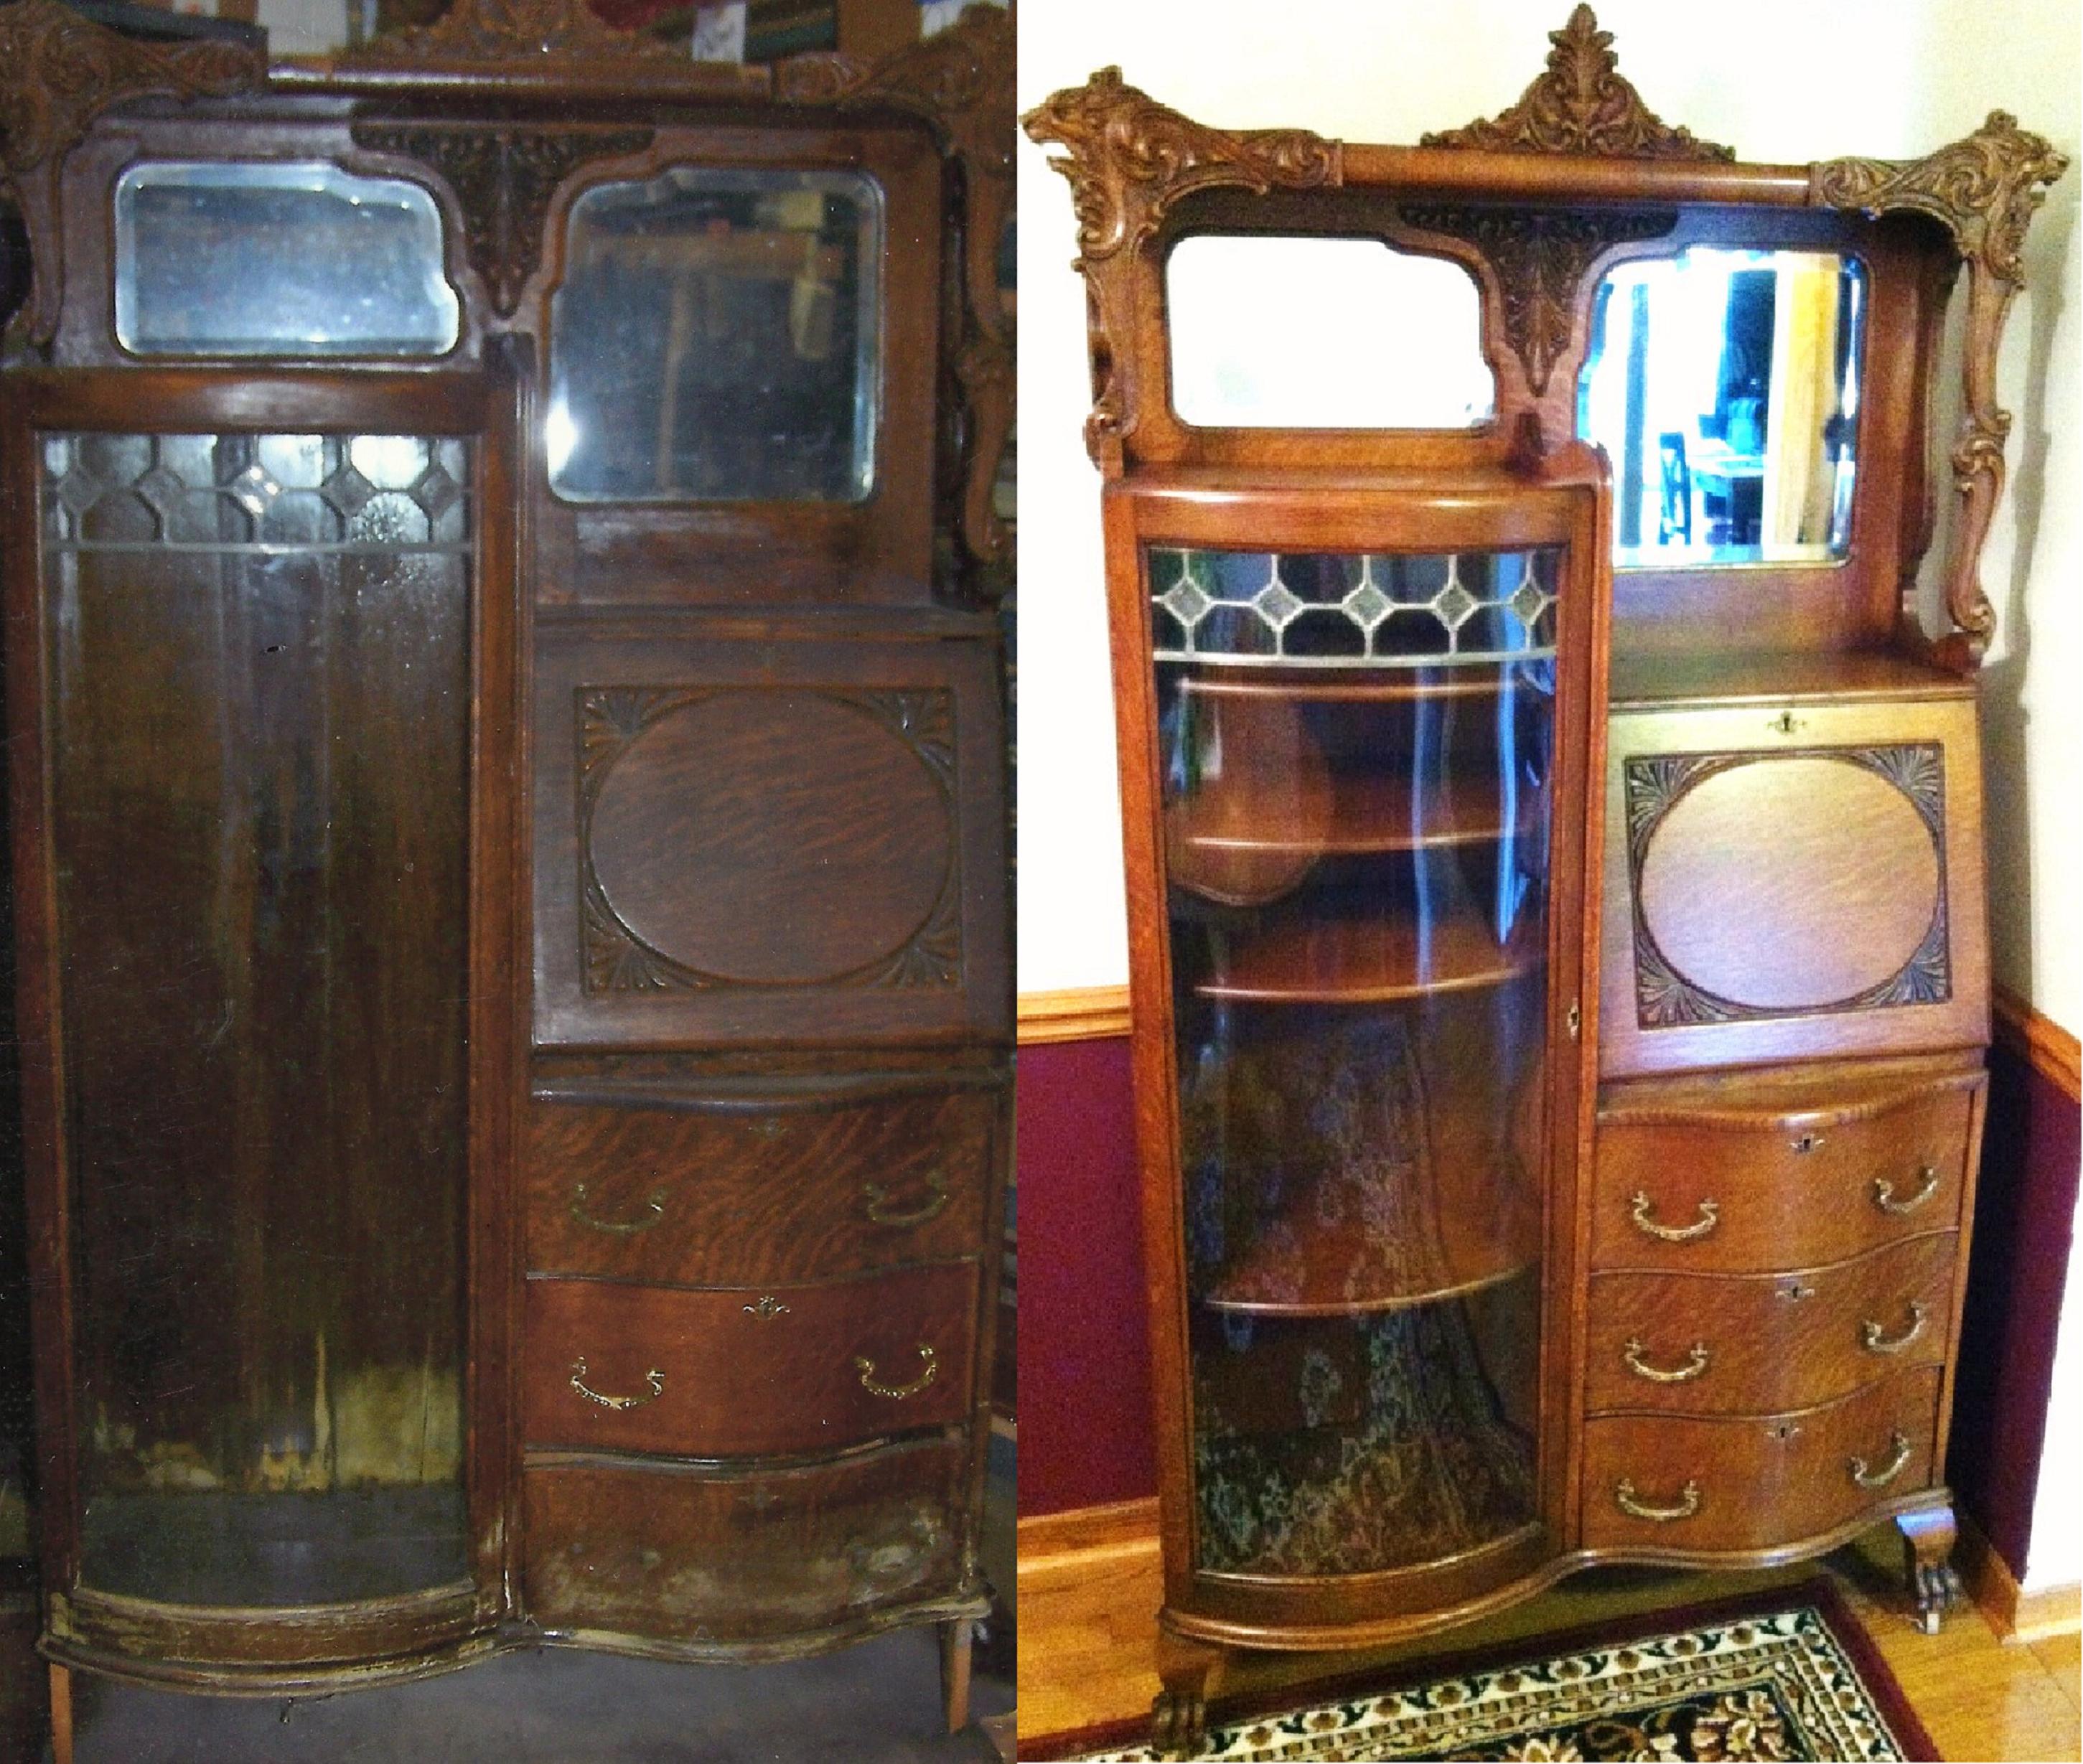 Side By Side We Were Chosen By A Jackson Customer To Restore This Piece To Fit Their Decor